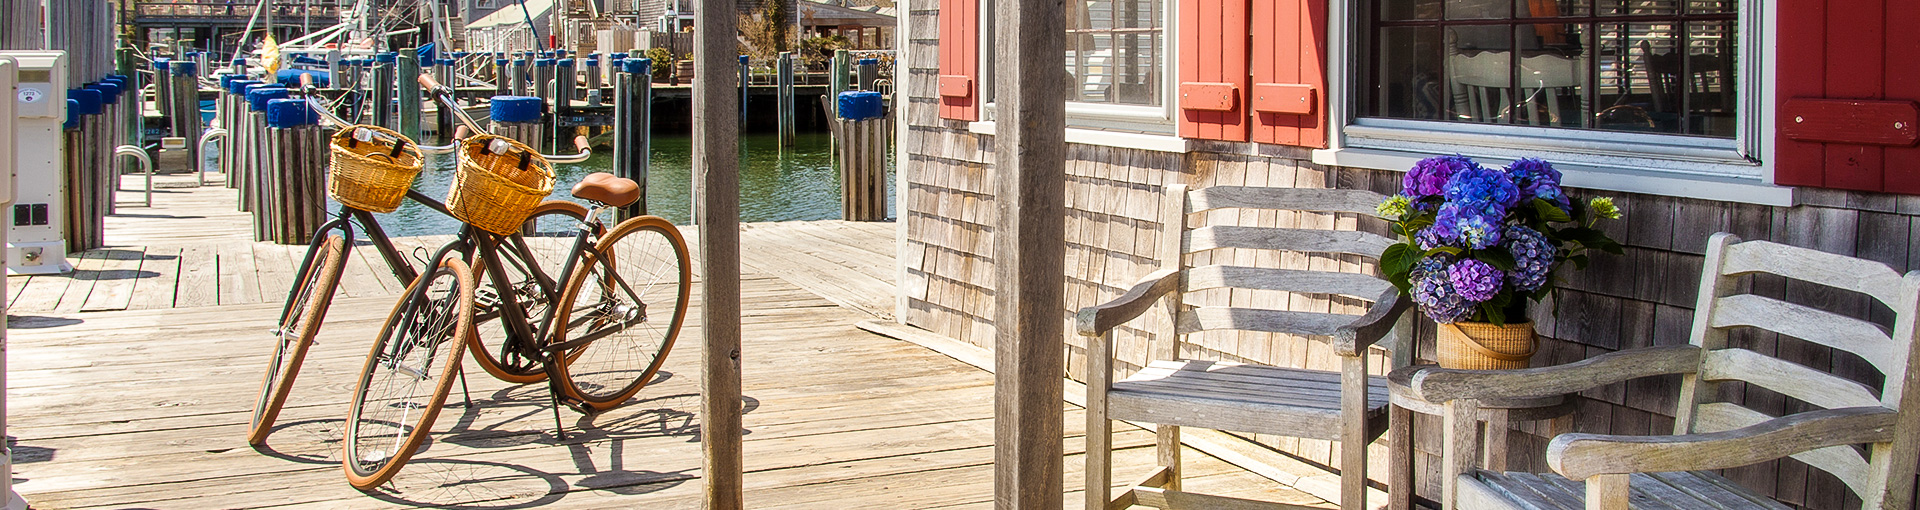 White Elephant Resorts, Nantucket Special Offers